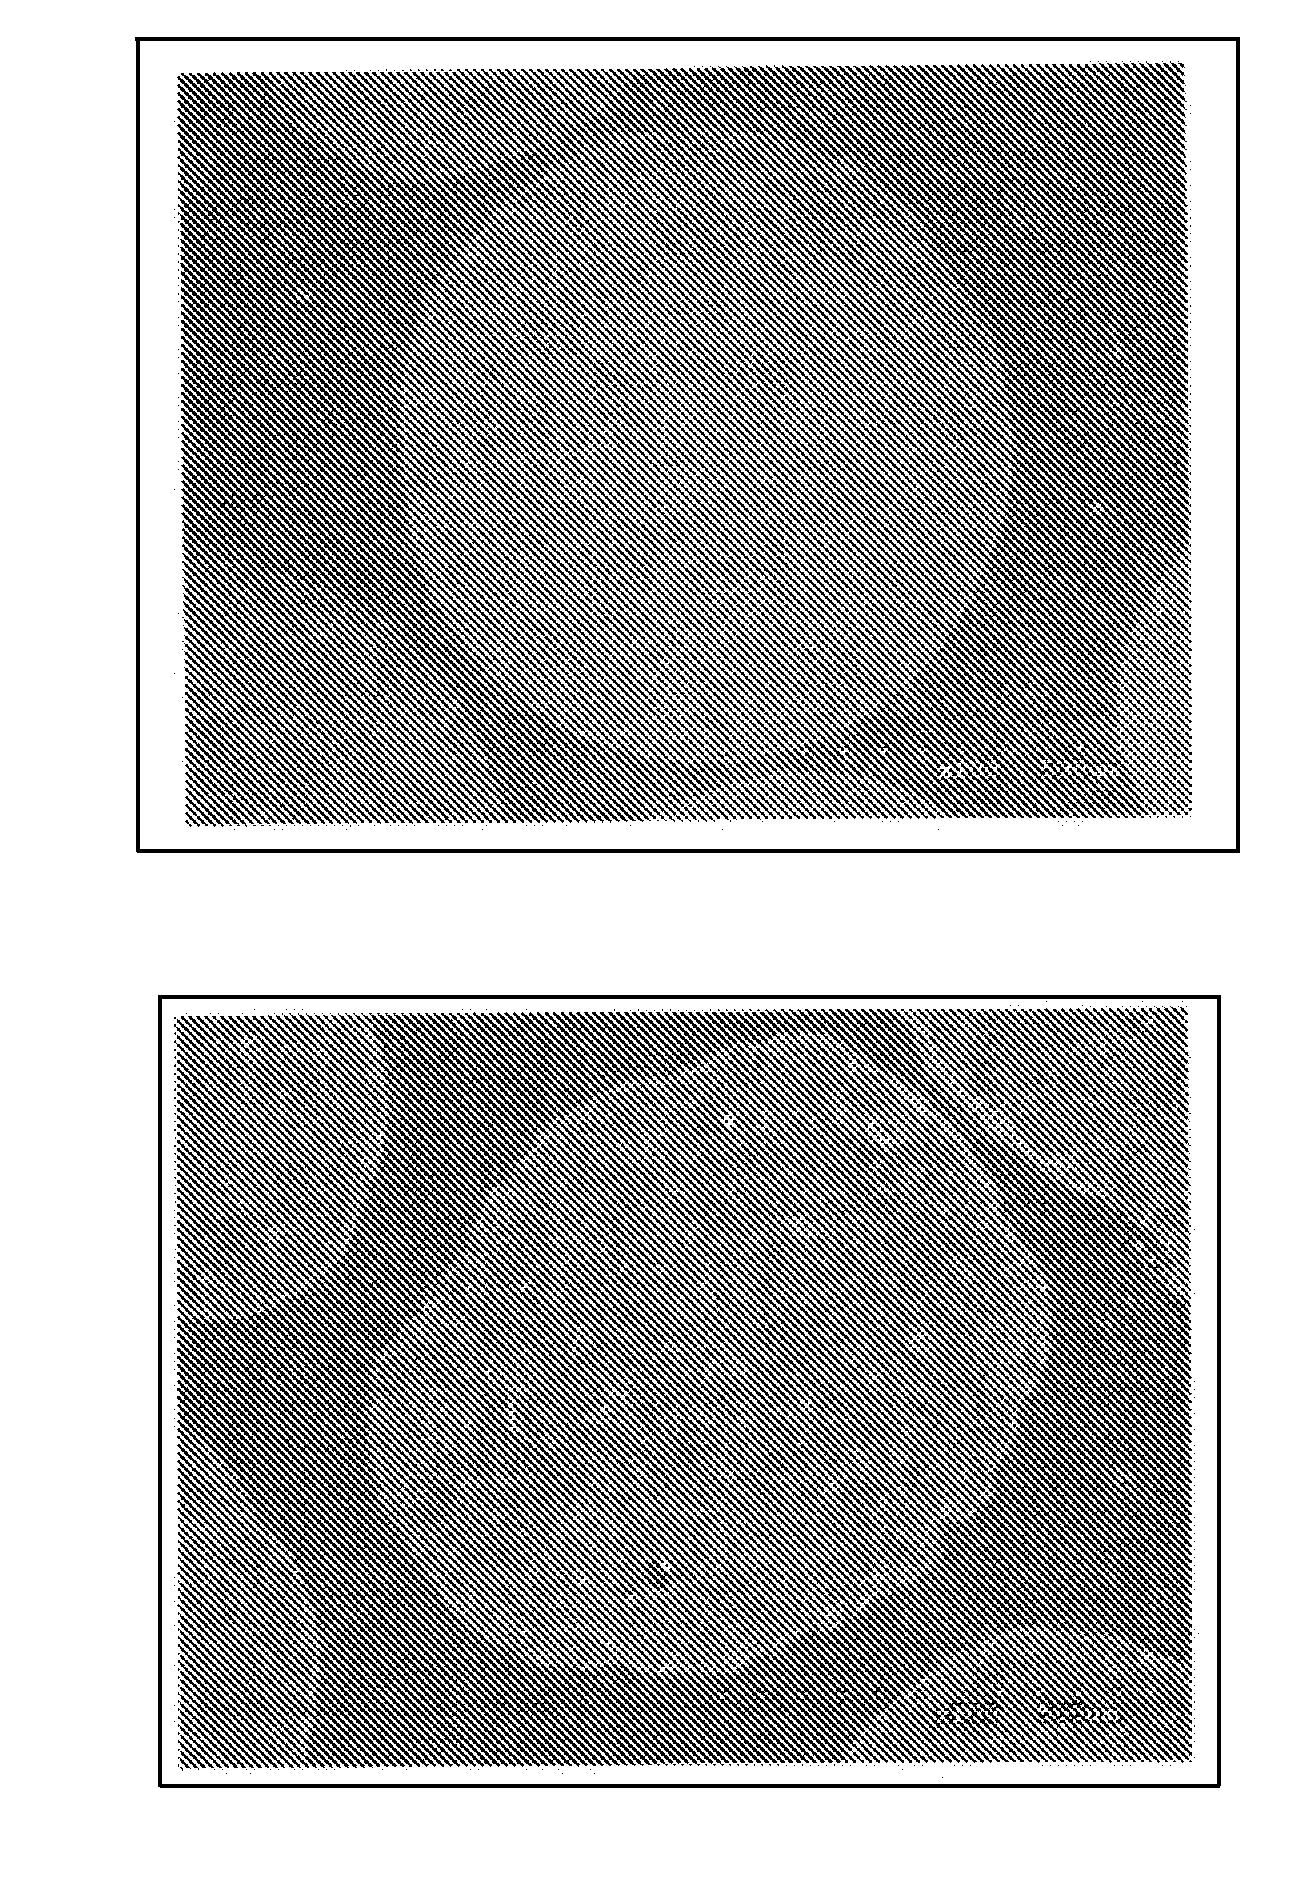 Proppant Particles Formed From Slurry Droplets and Method of Use